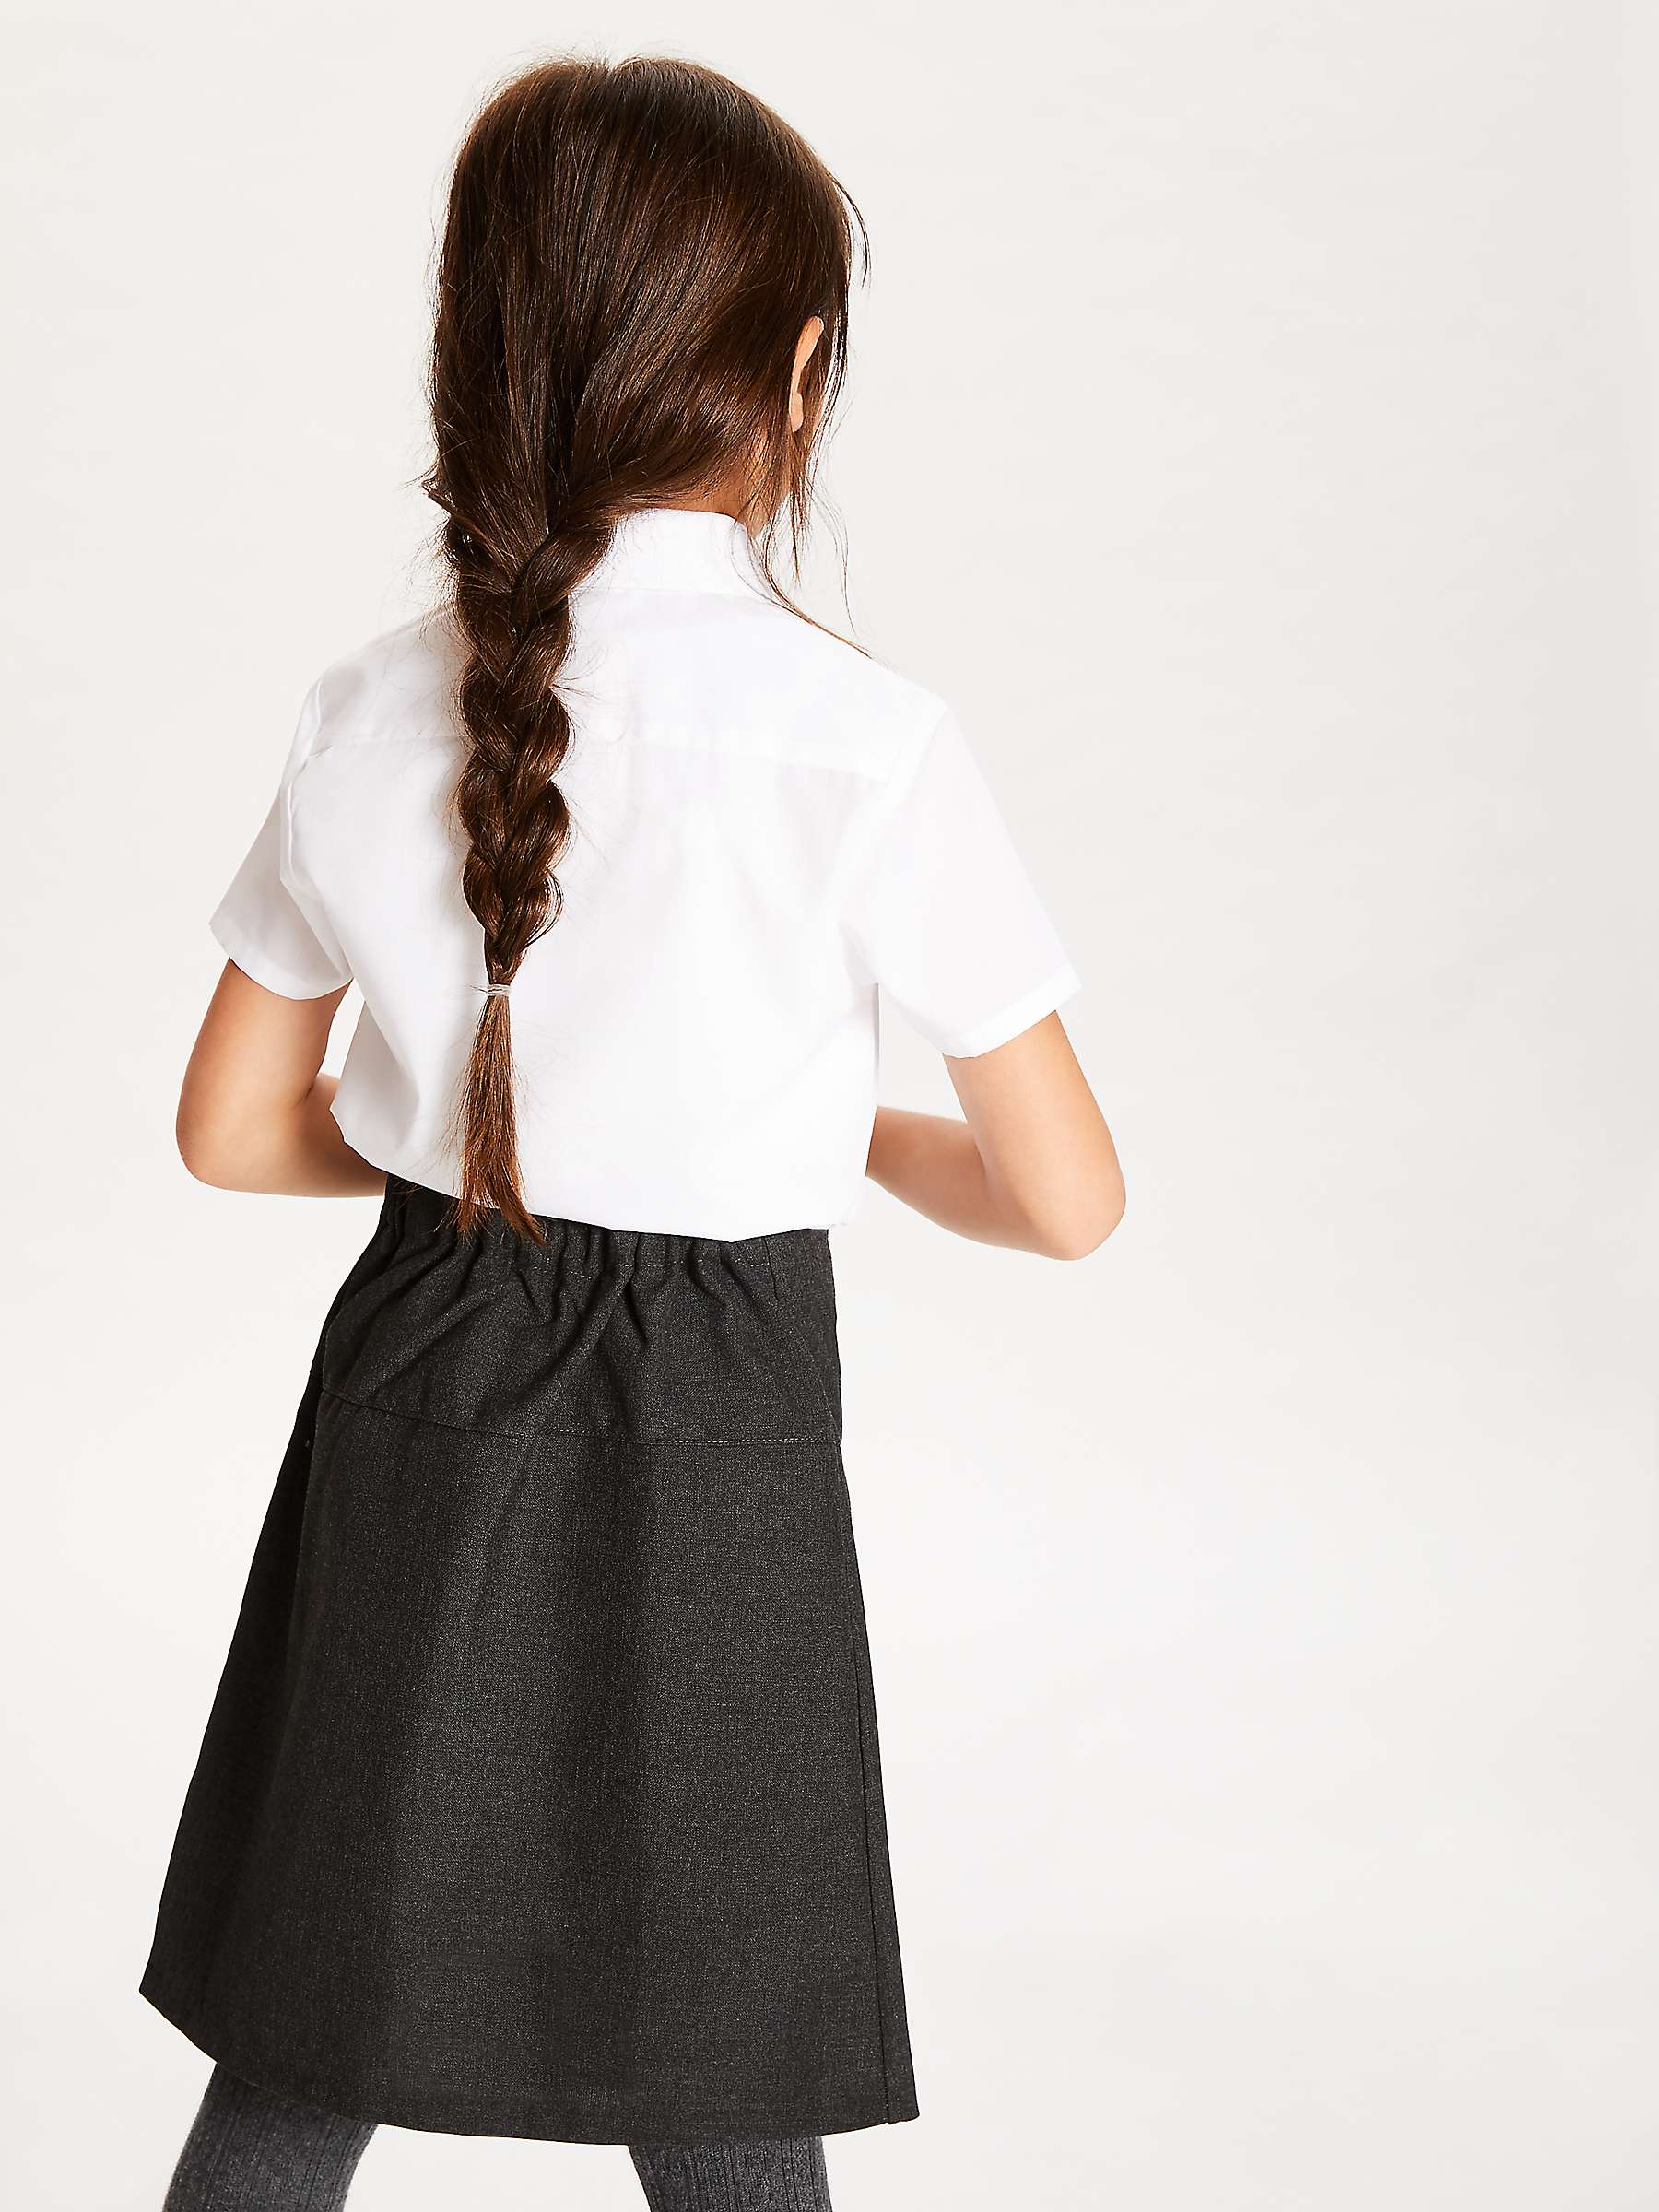 Buy John Lewis ANYDAY Kids' School Shirts, Pack of 3 Online at johnlewis.com